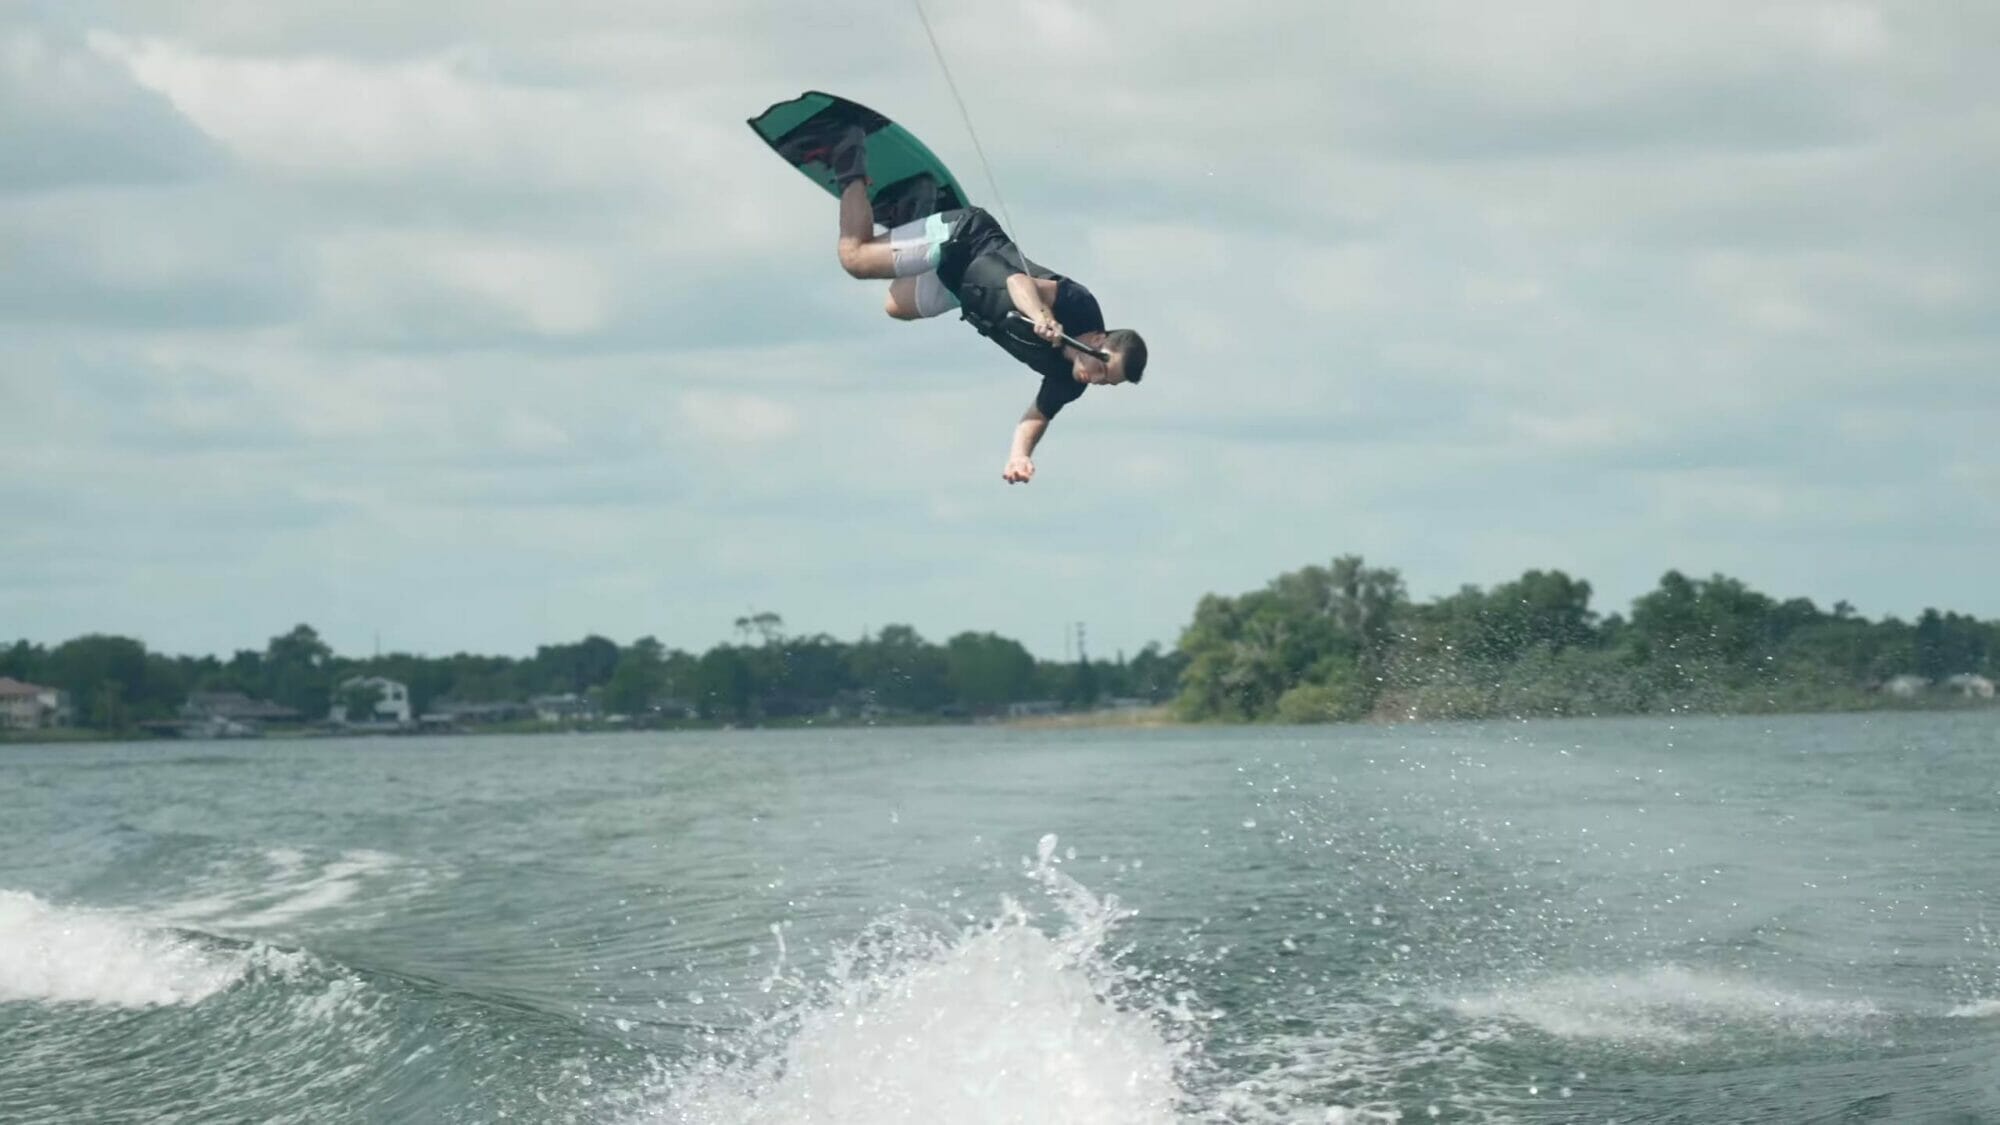 A man wakeboarding in the air over a body of water.